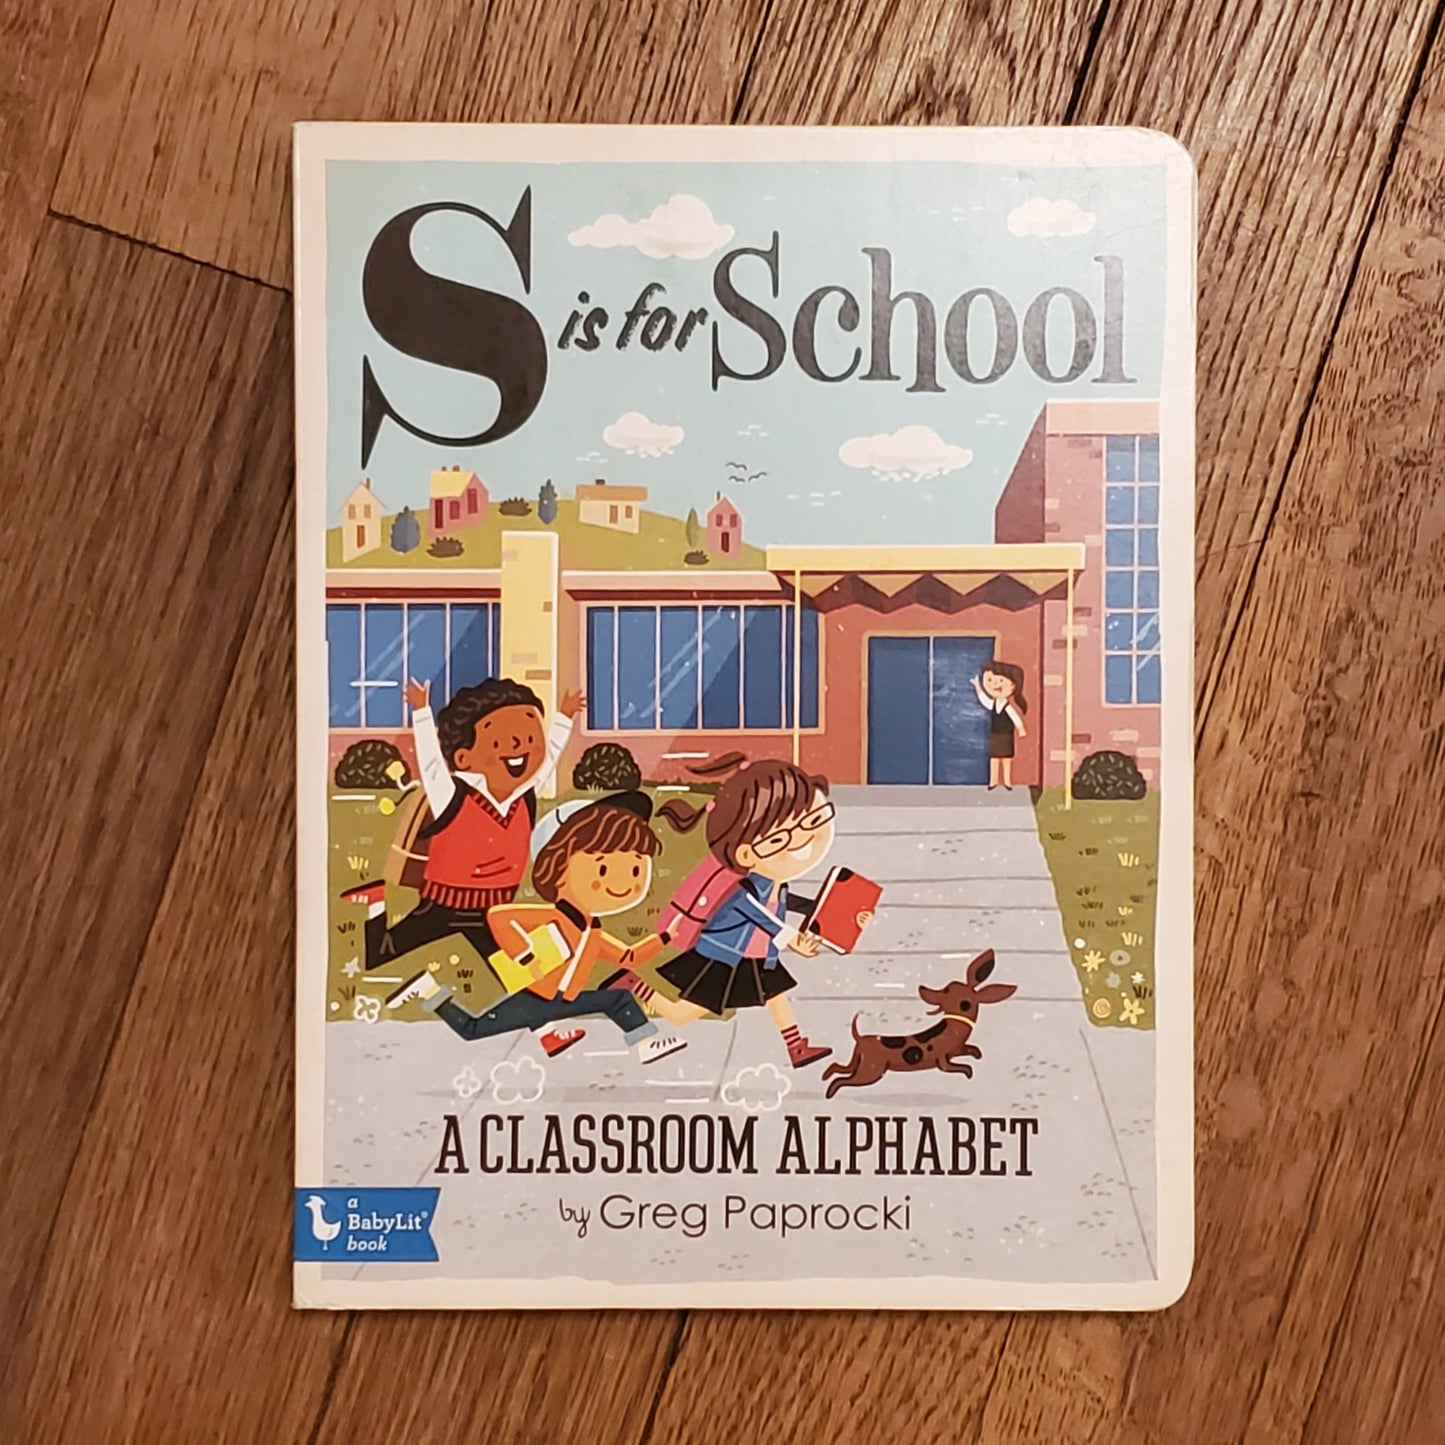 GB Board Book - S is for School: A Classroom Alphabet